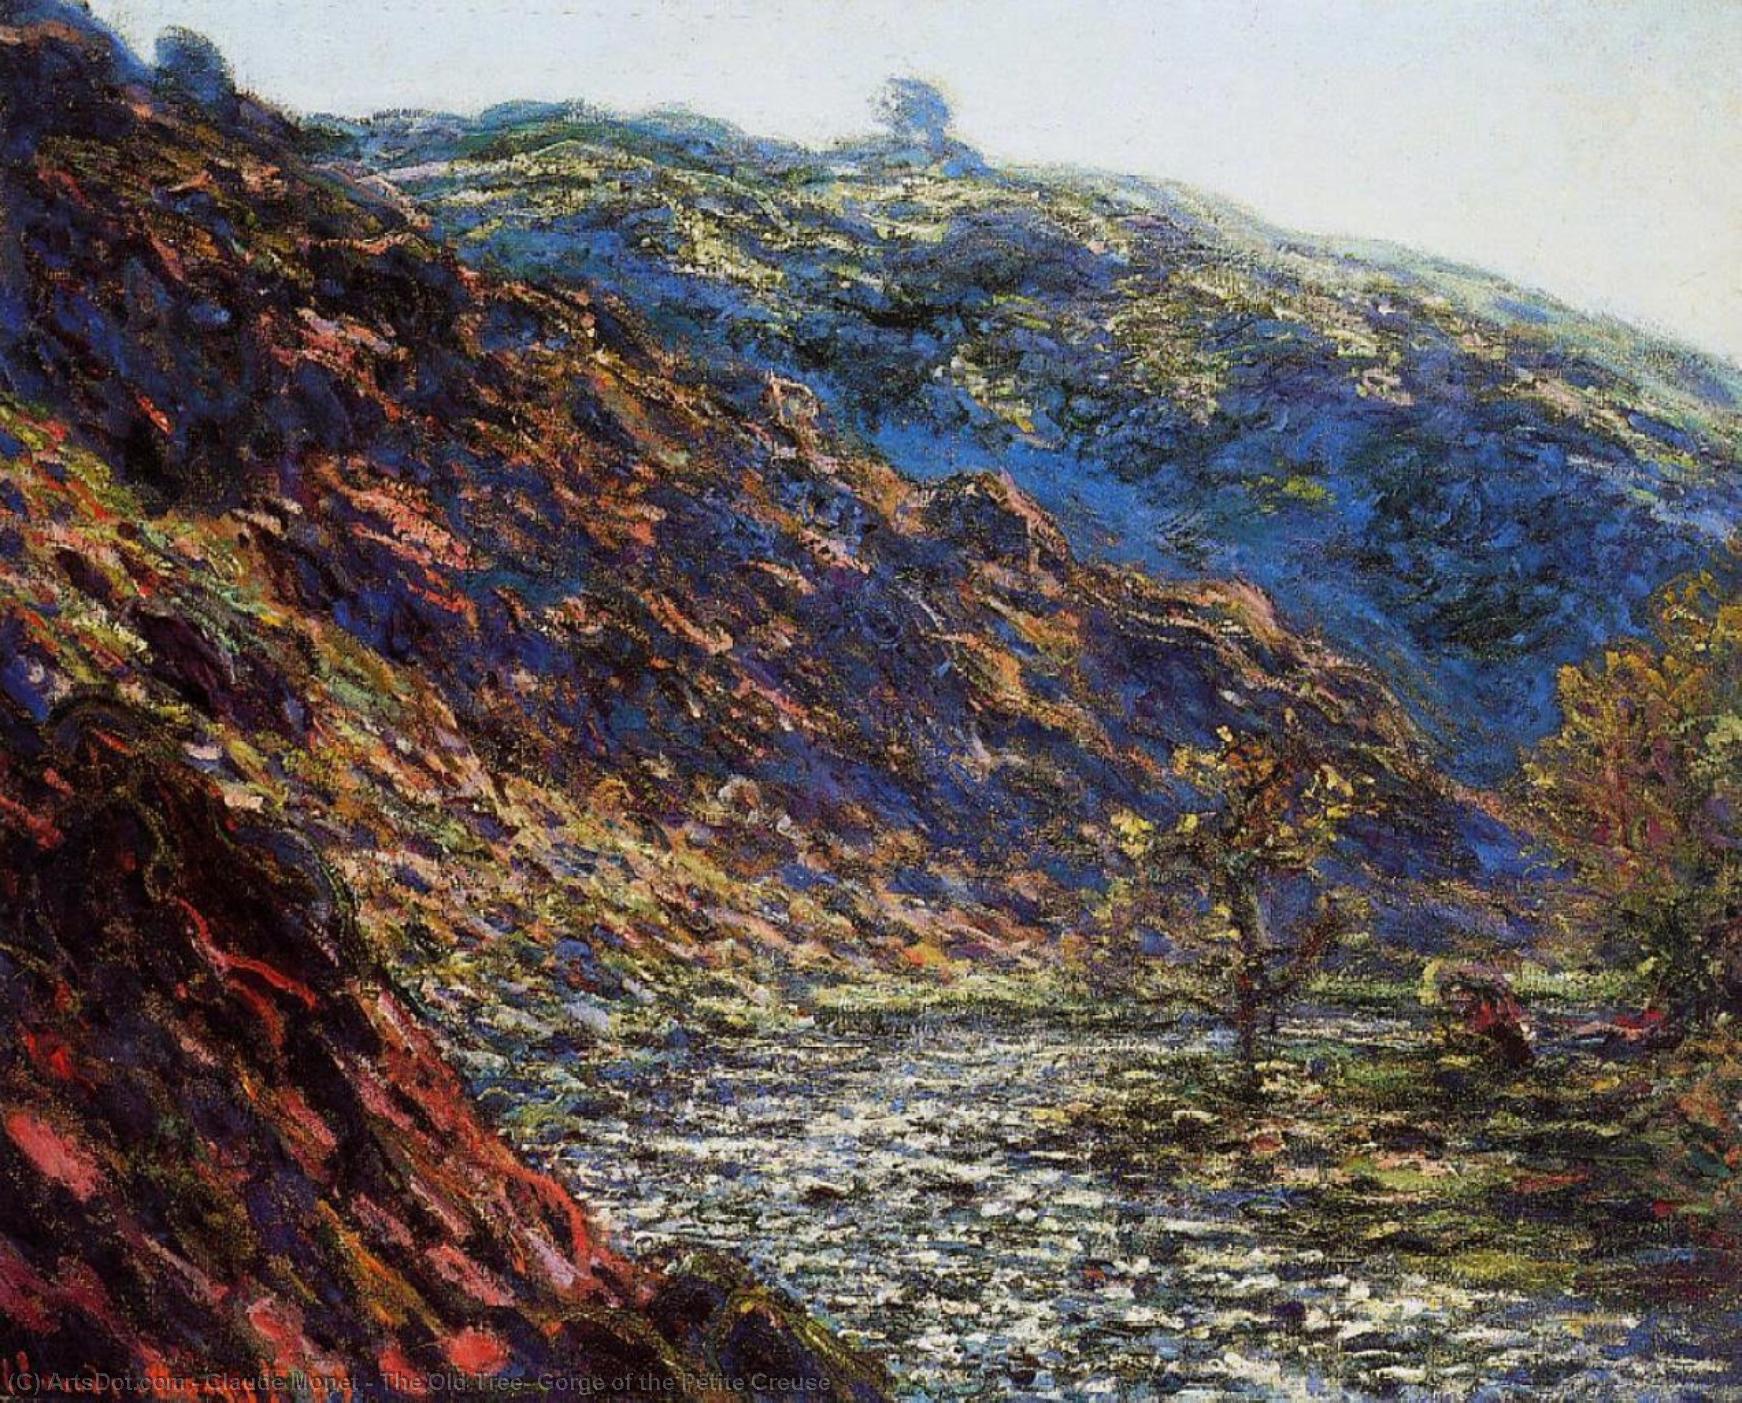 WikiOO.org - 백과 사전 - 회화, 삽화 Claude Monet - The Old Tree, Gorge of the Petite Creuse